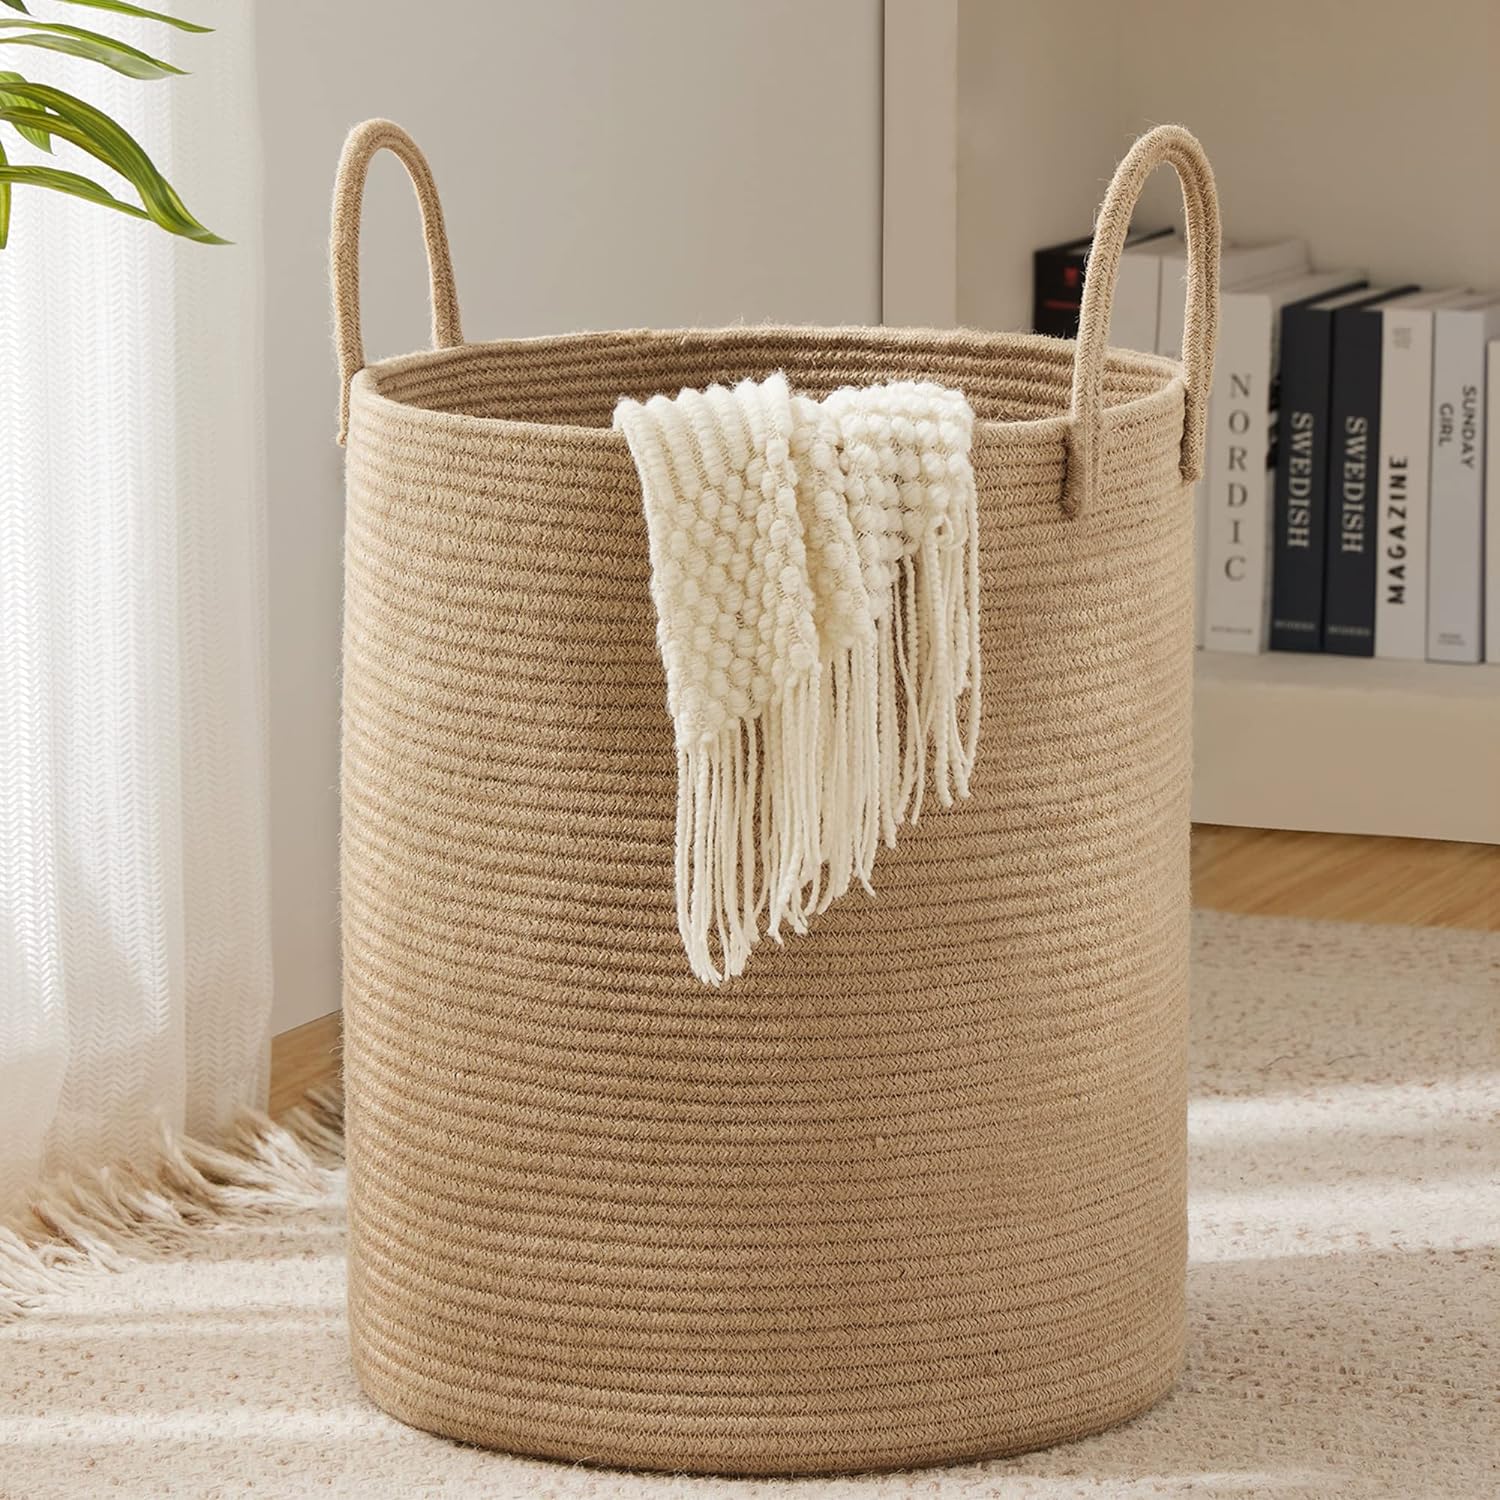 Jute Rope Woven Laundry Hamper Basket by YOUDENOVA, 58L Tall Laundry Basket, Baby Nursery Hamper for Blanket Storage, Clothes Hamper for Laundry in Bedroom-Large-Jute